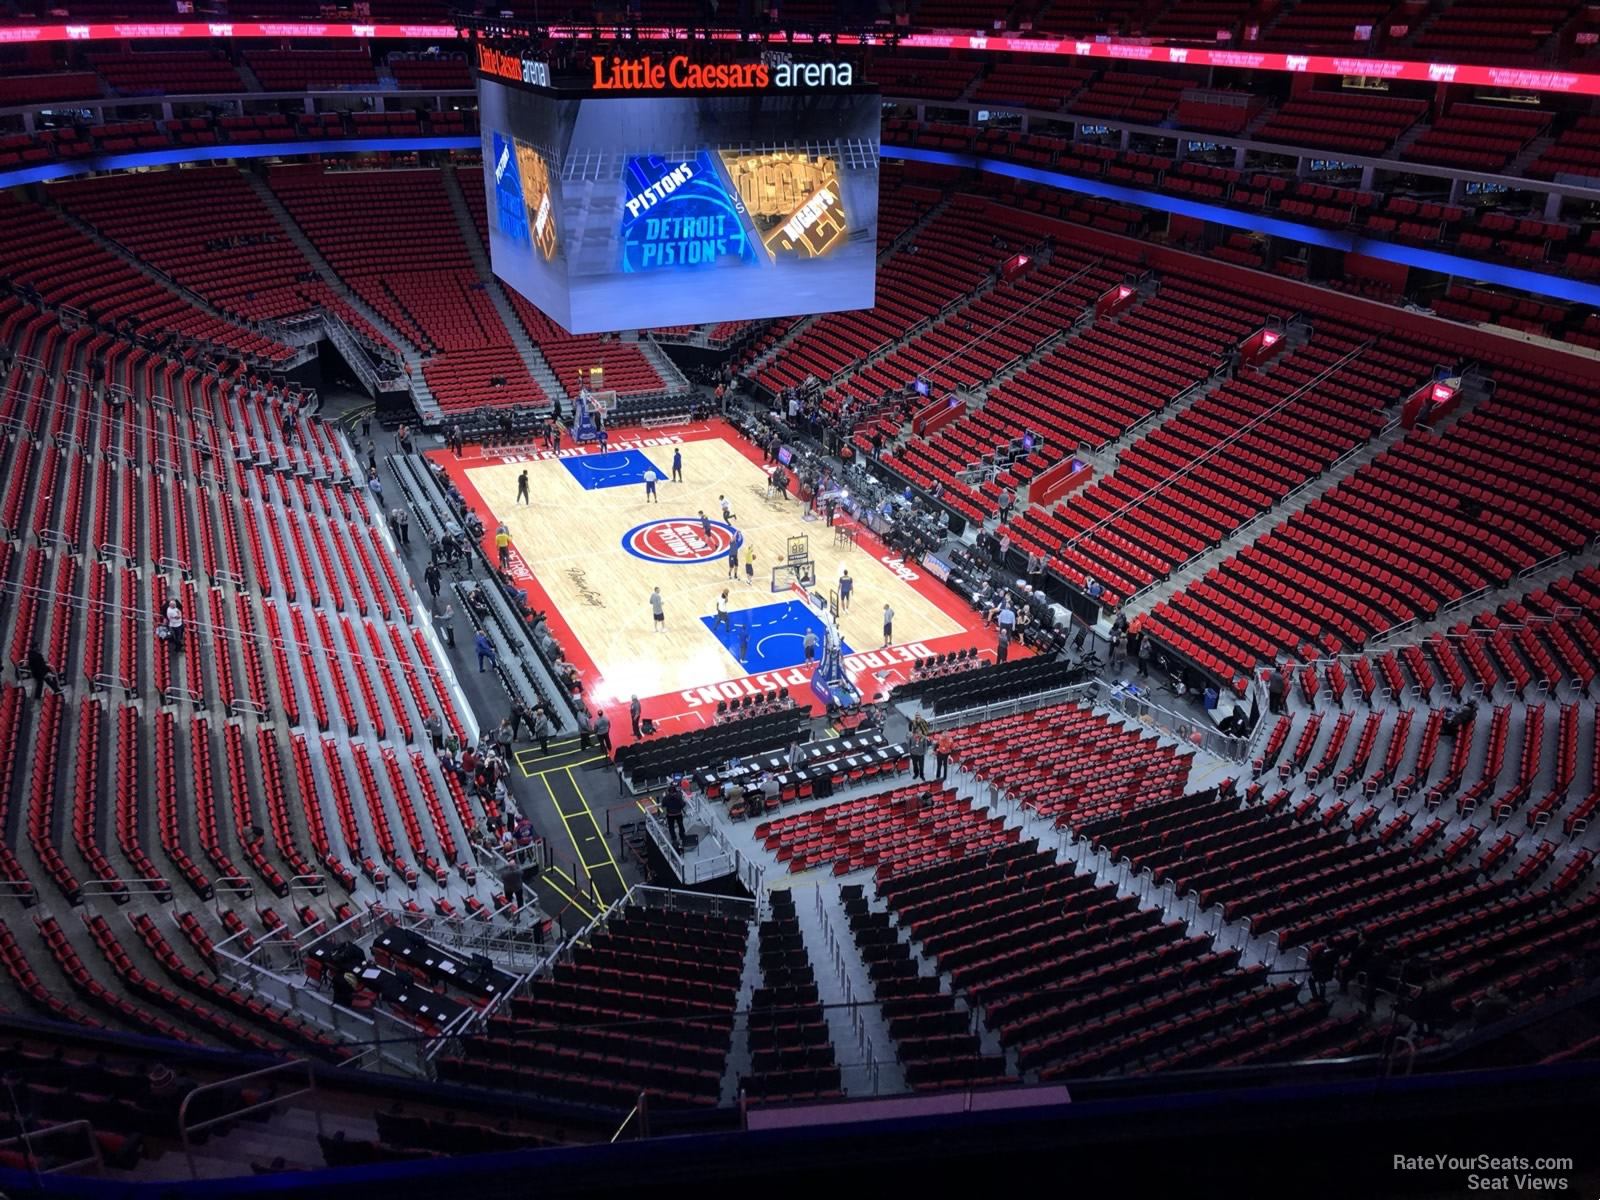 section 205, row 4 seat view  for basketball - little caesars arena